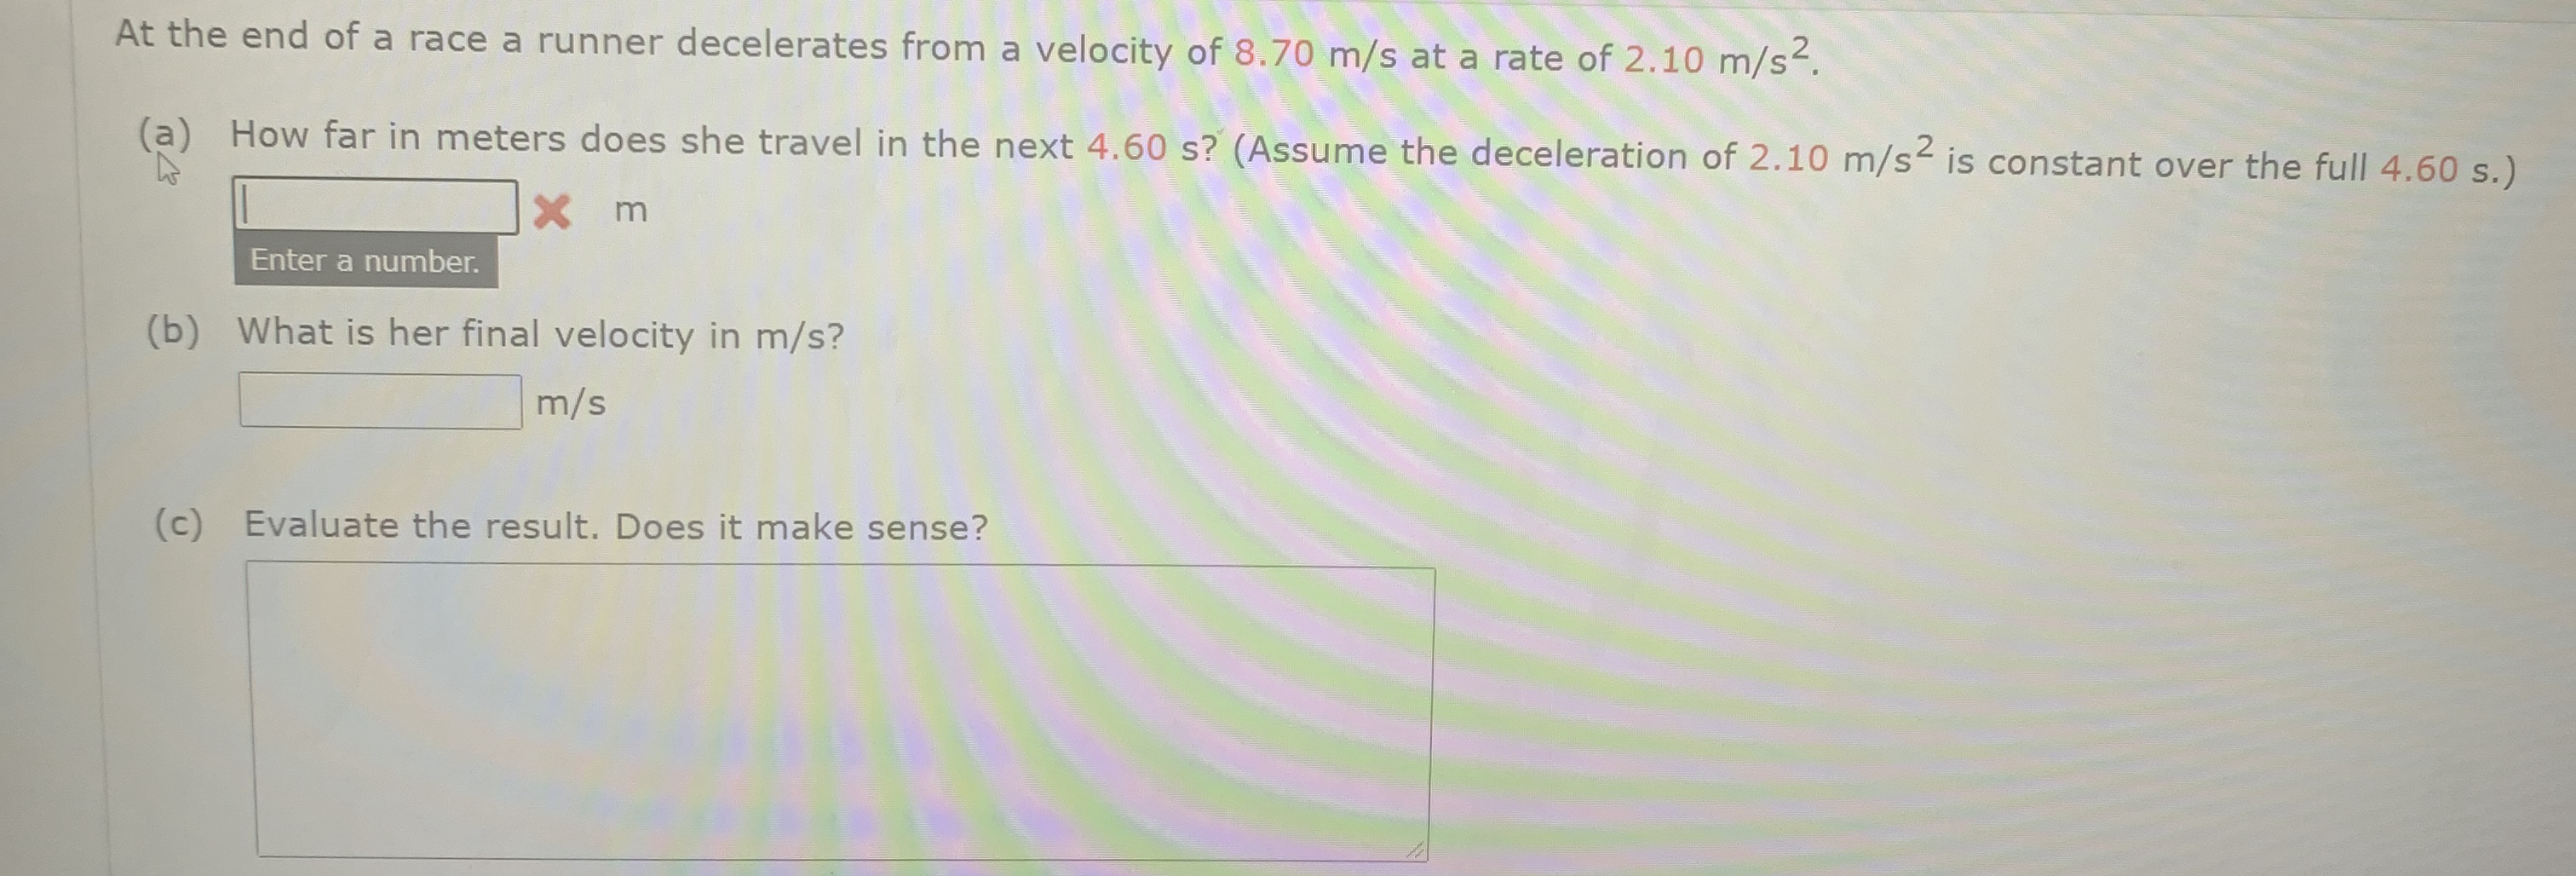 At the end of a race a runner decelerates from a velocity of 8.70 m/s at a rate of 2.10 m/s.
(a) How far in meters does she travel in the next 4.60 s? (Assume the deceleration of 2.10 m/s is constant over the full 4.60 s.)
X m
Enter a number.
(b) What is her final velocity in m/s?
m/s
(c) Evaluate the result. Does it make sense?
